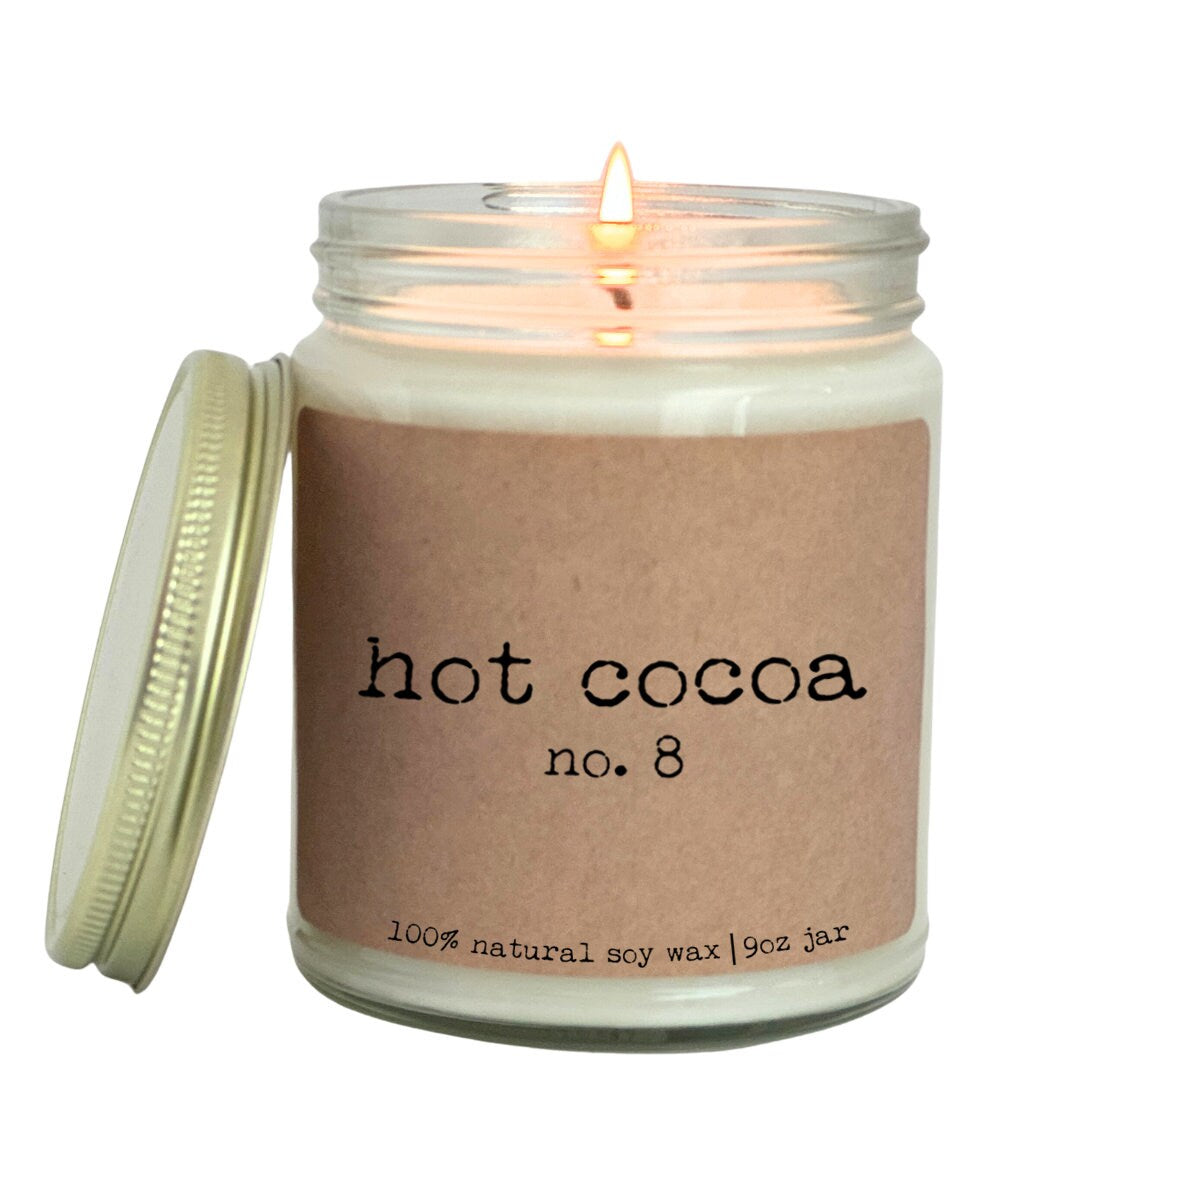 a candle with a label that says hot cocoa no 8